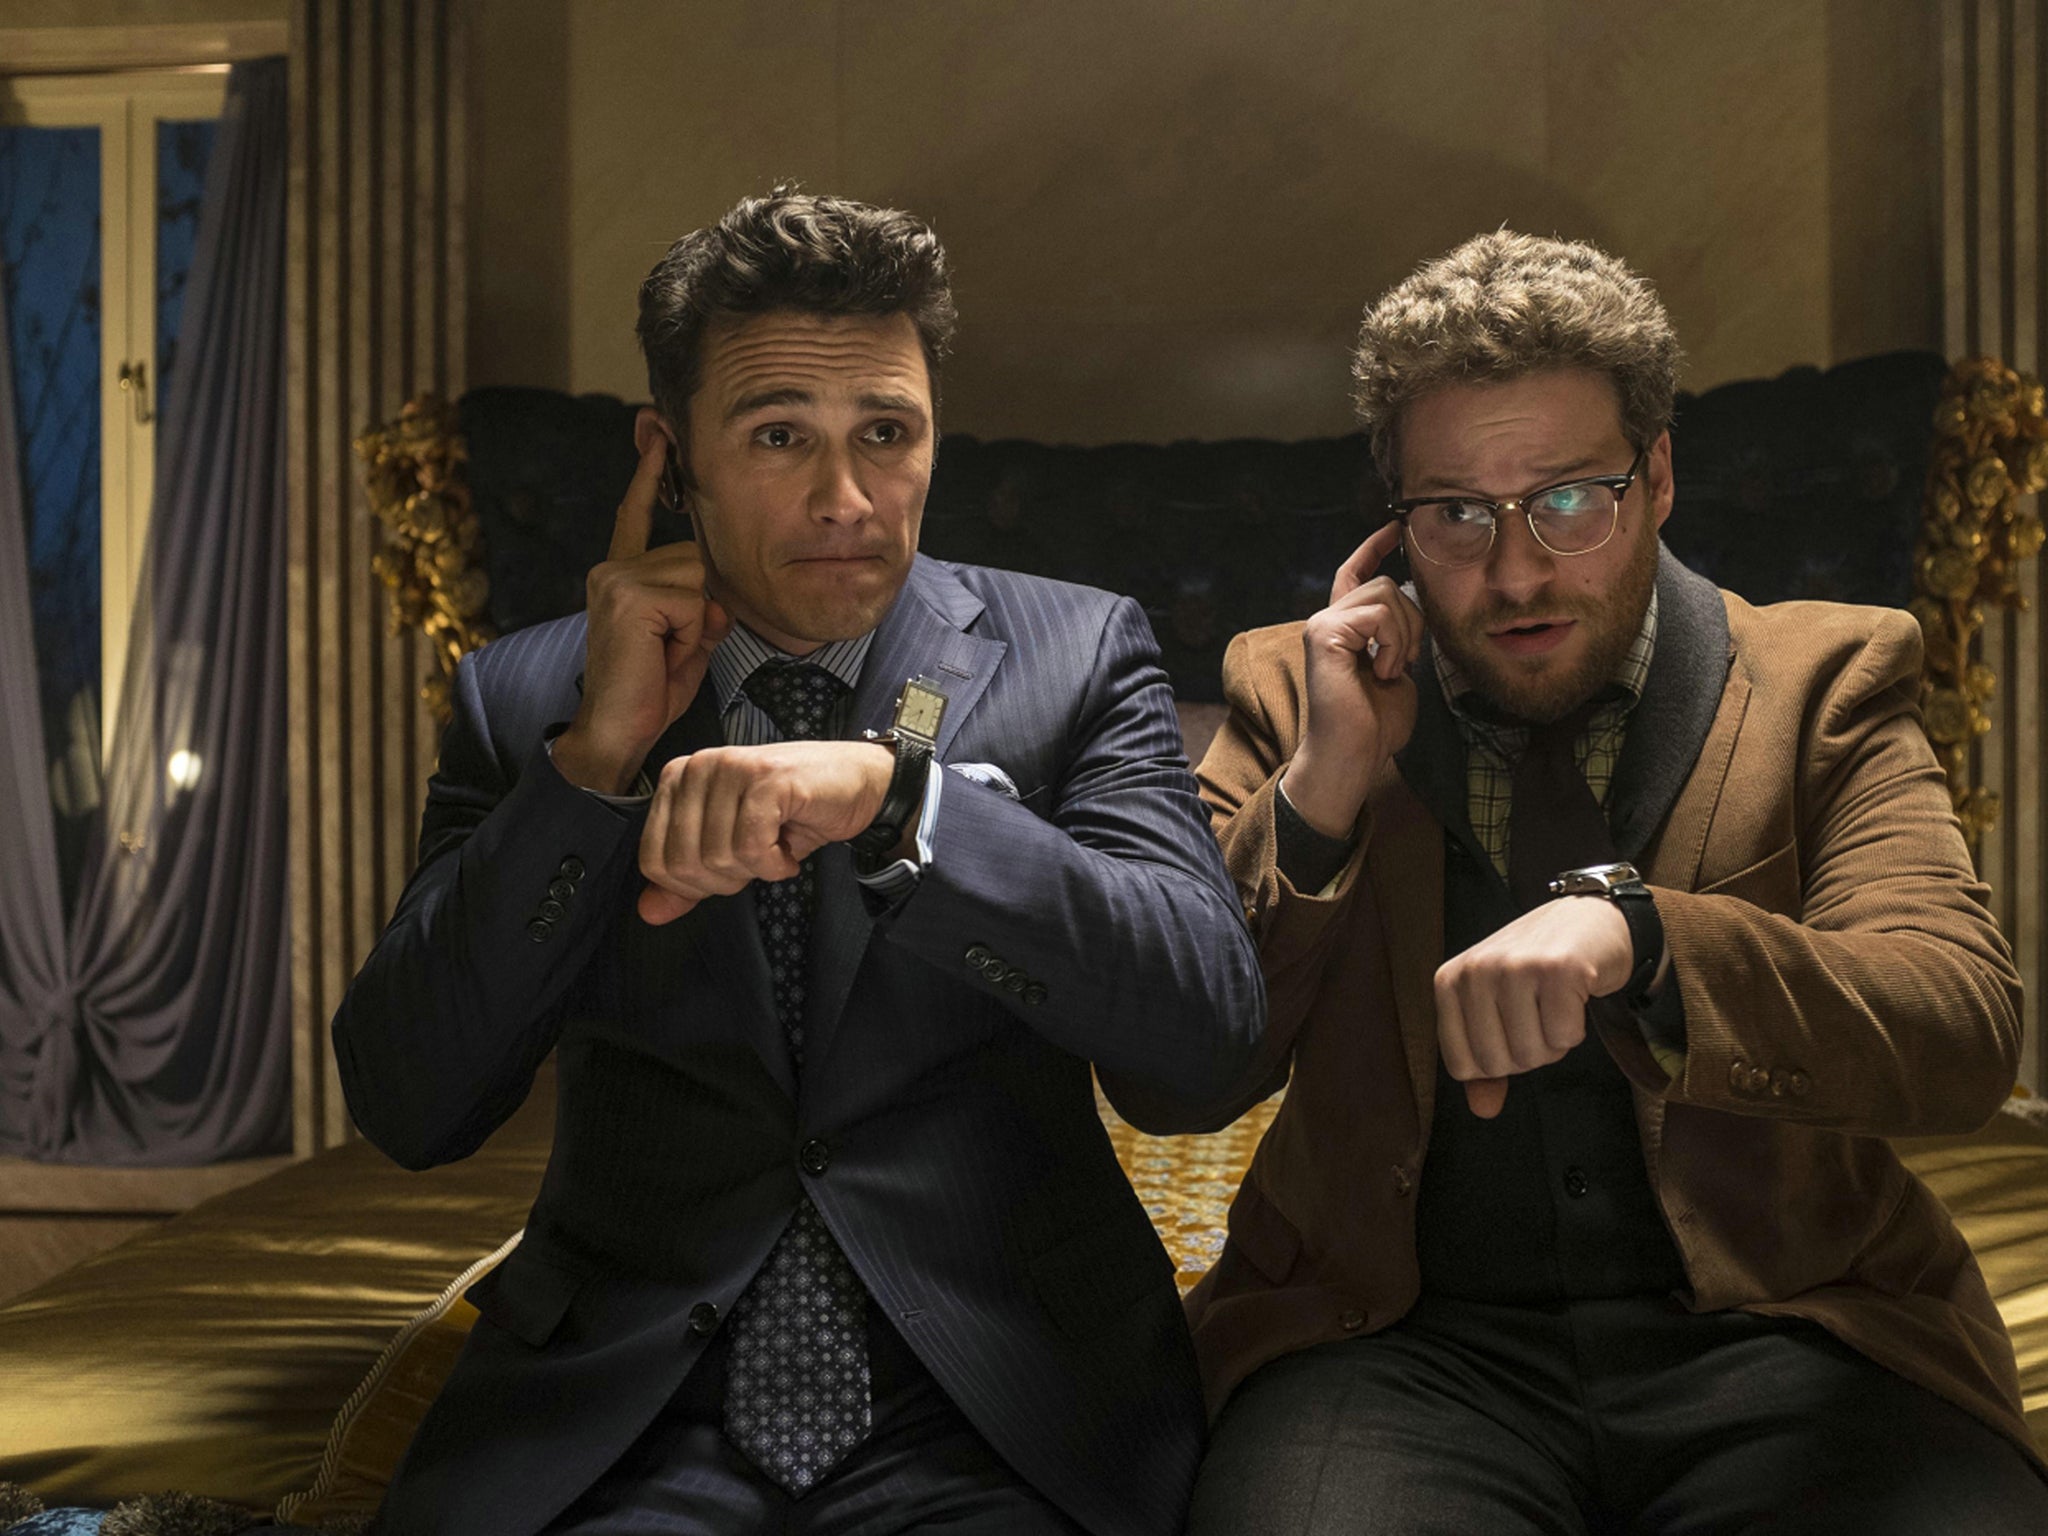 A still from The Interview, starring Seth Rogen and James Franco